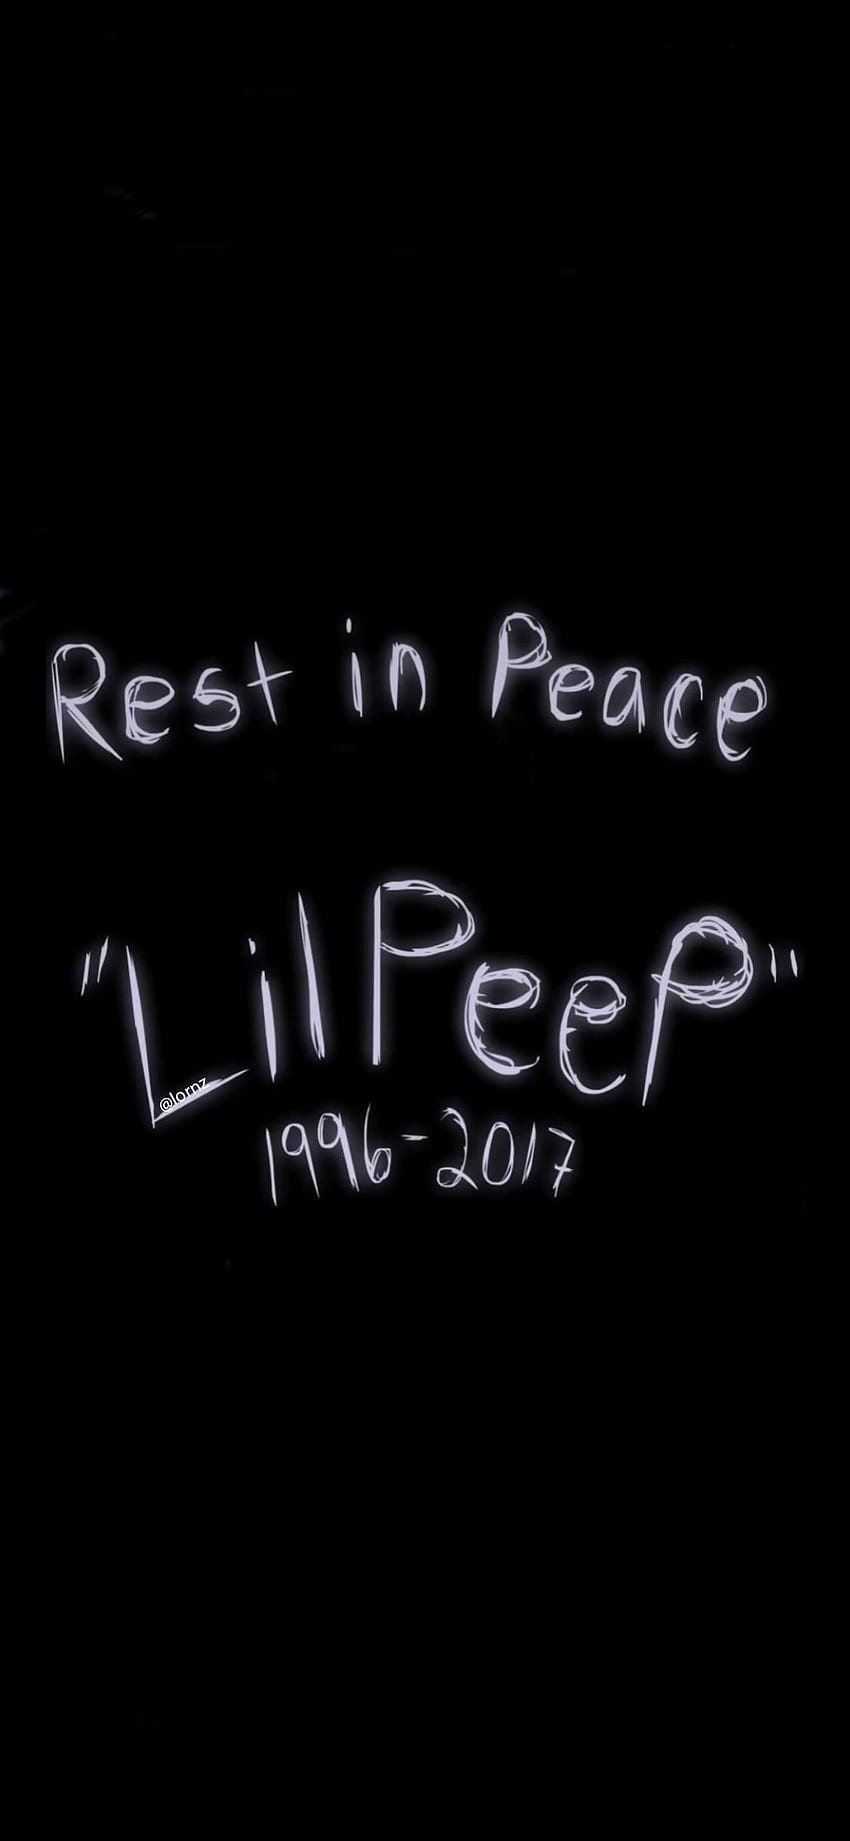 Rip lil peep . Ill never forget you, Rest in peace, Lil HD phone ...